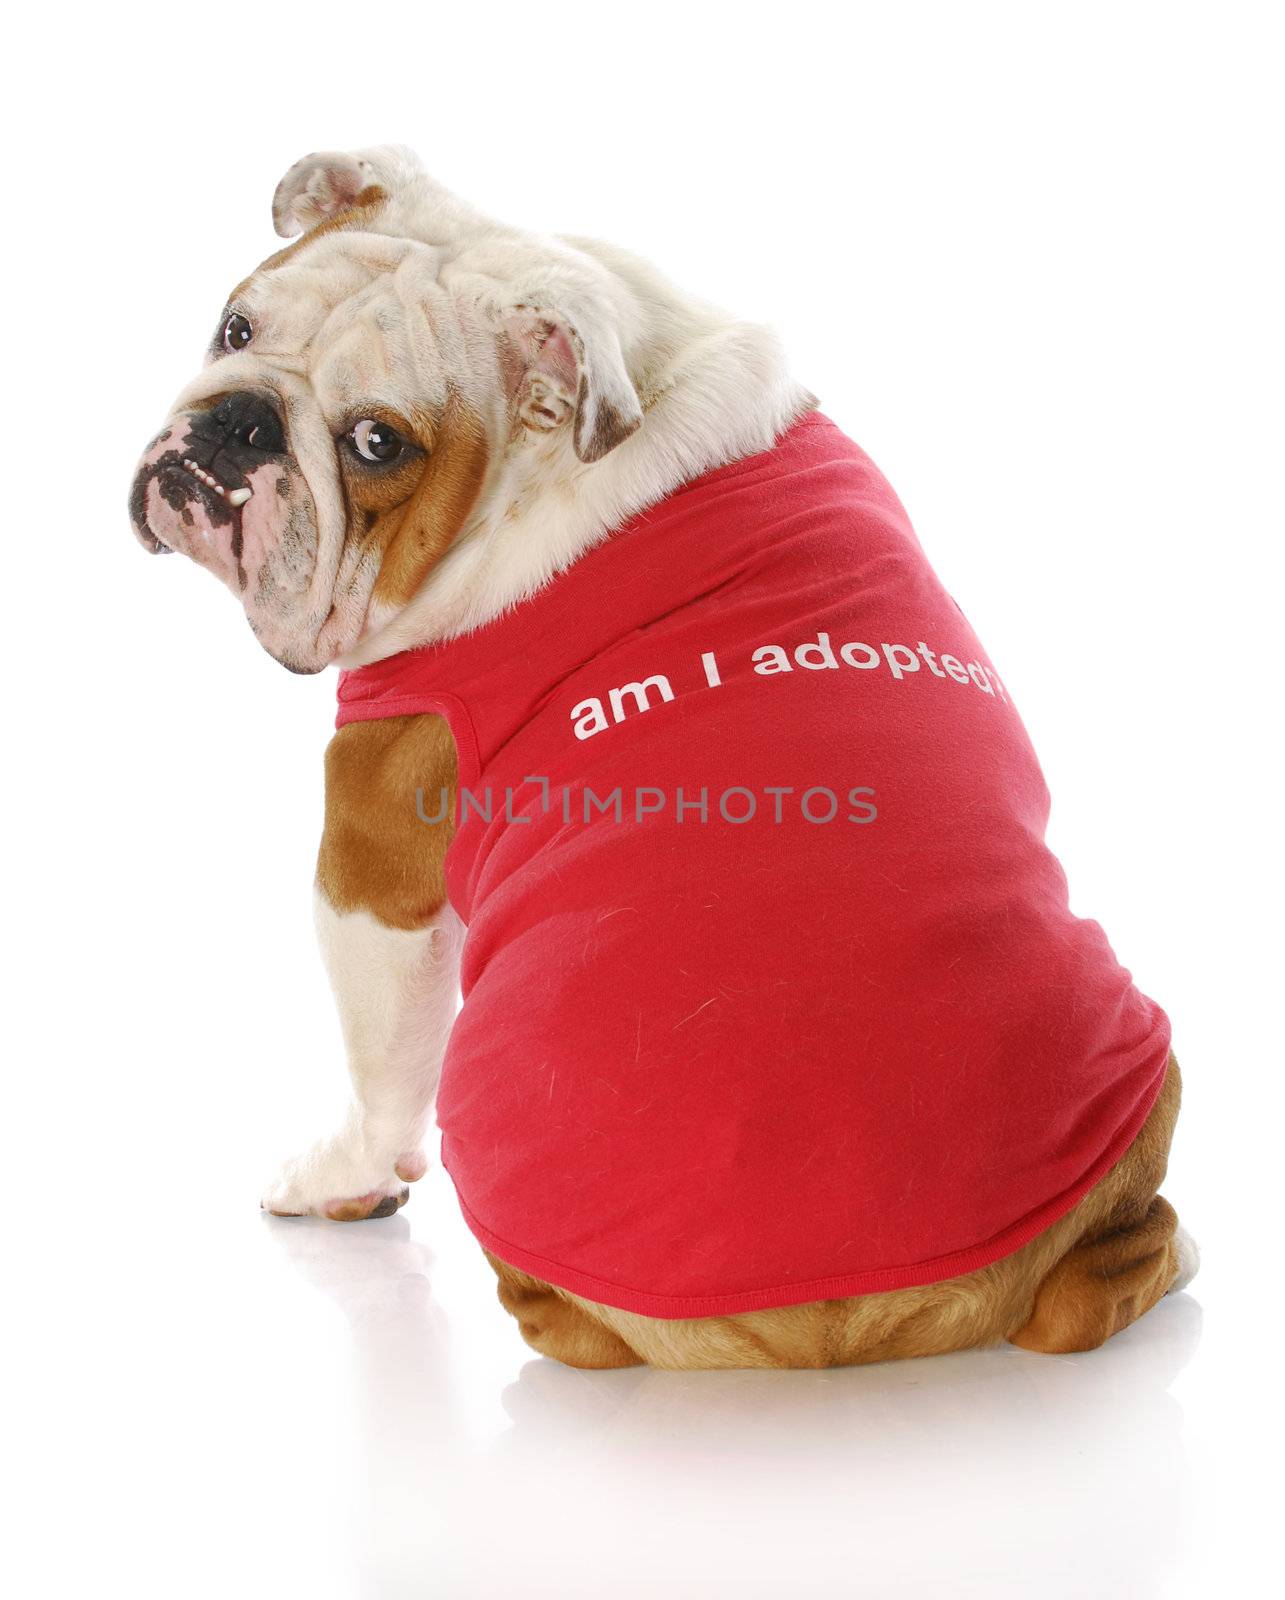 english bulldog wearing red shirt that says "Am I Adopted?" with reflection on white background